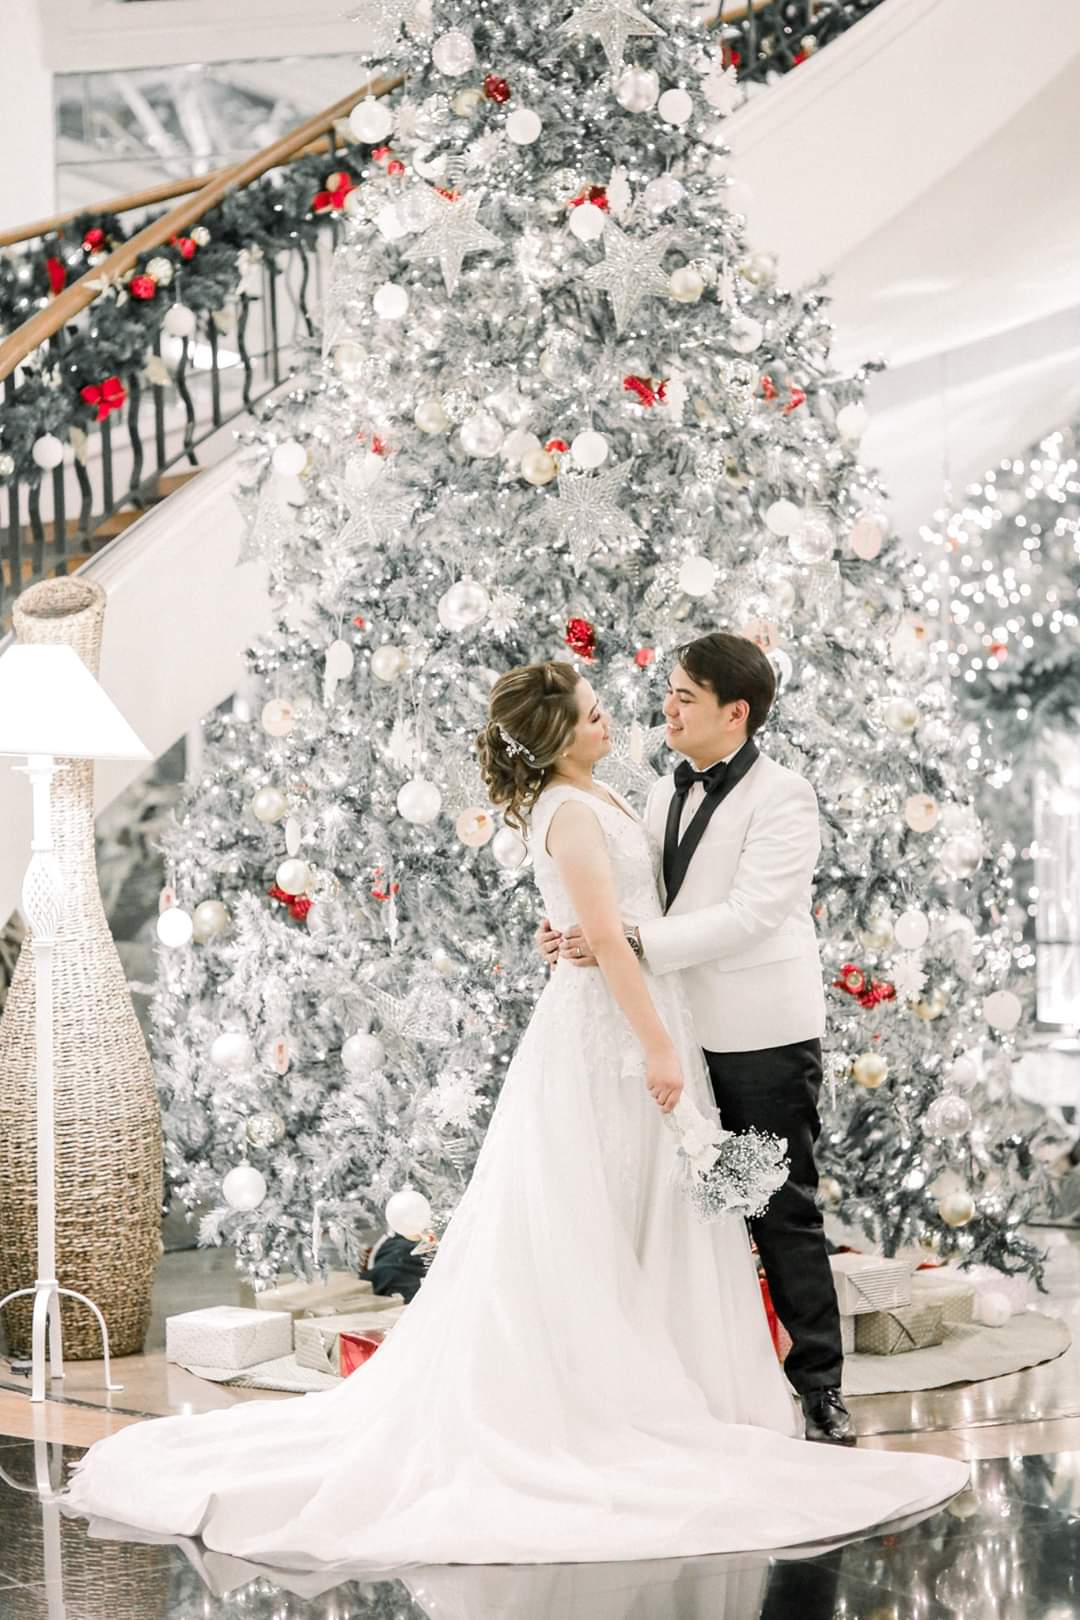 Chris and Nin's Wedding Gown and Suit (December 2019)